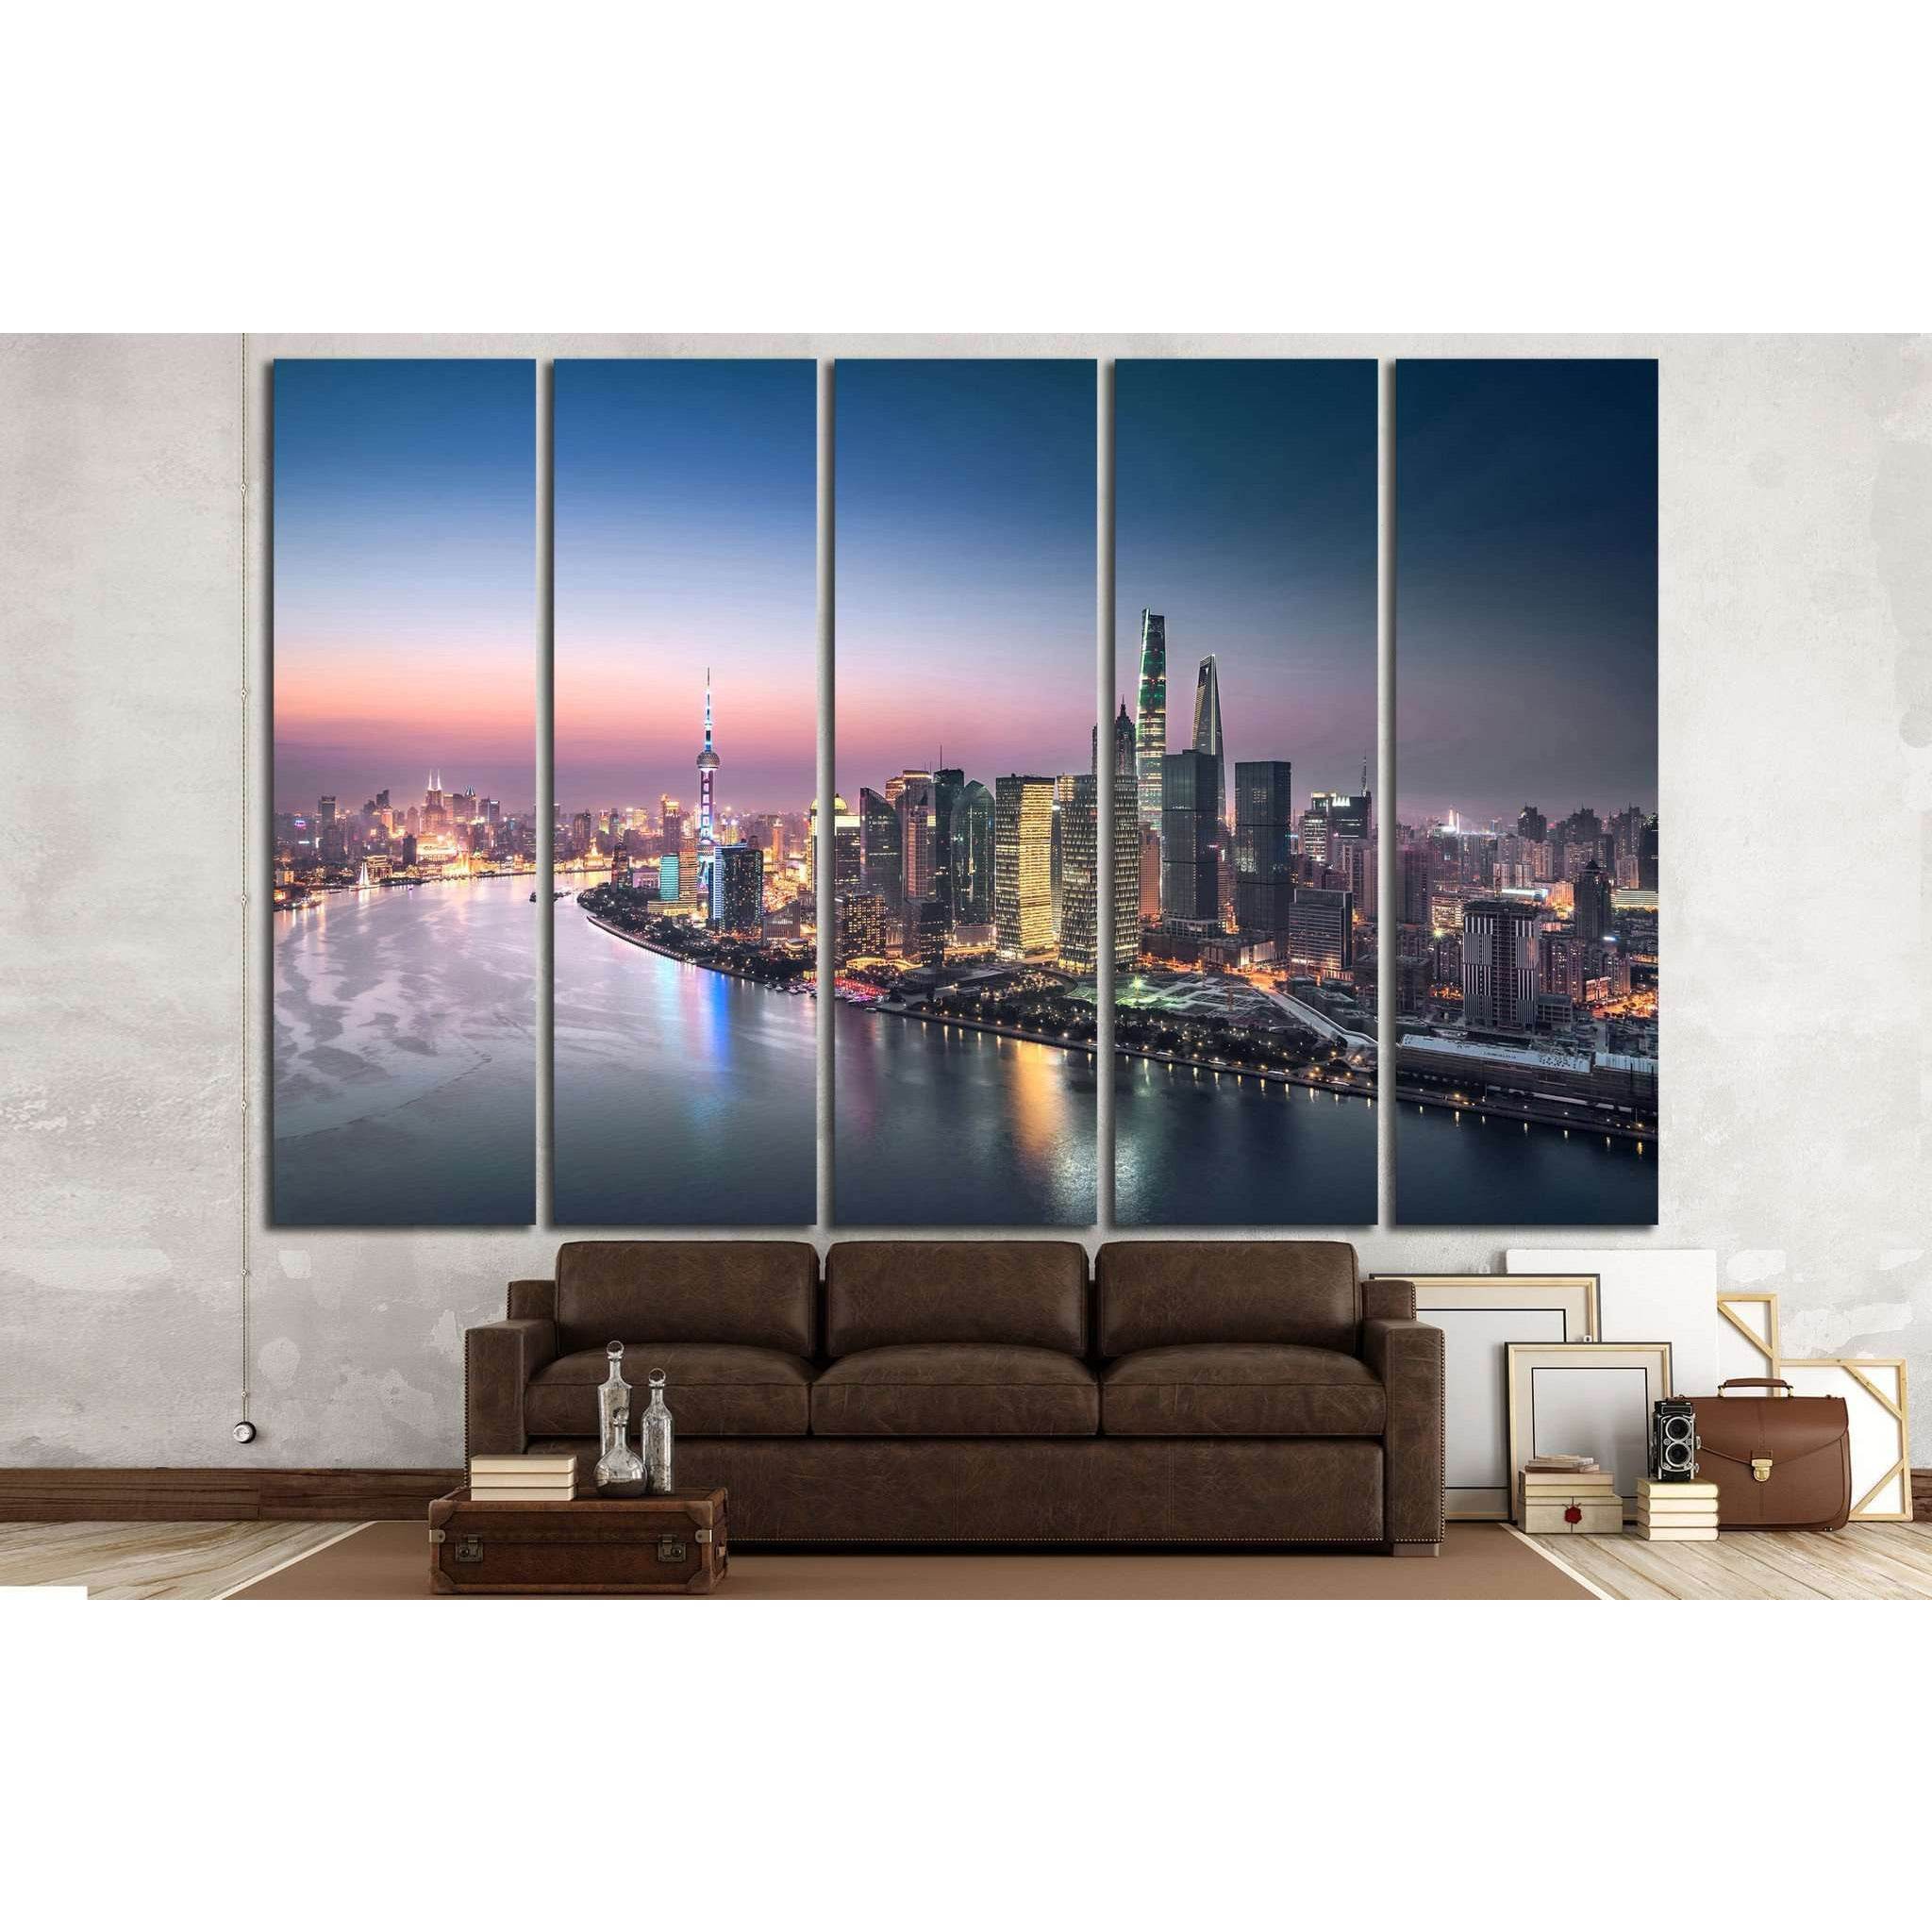 Shanghai skyline and cityscape at night №1251 Ready to Hang Canvas Print